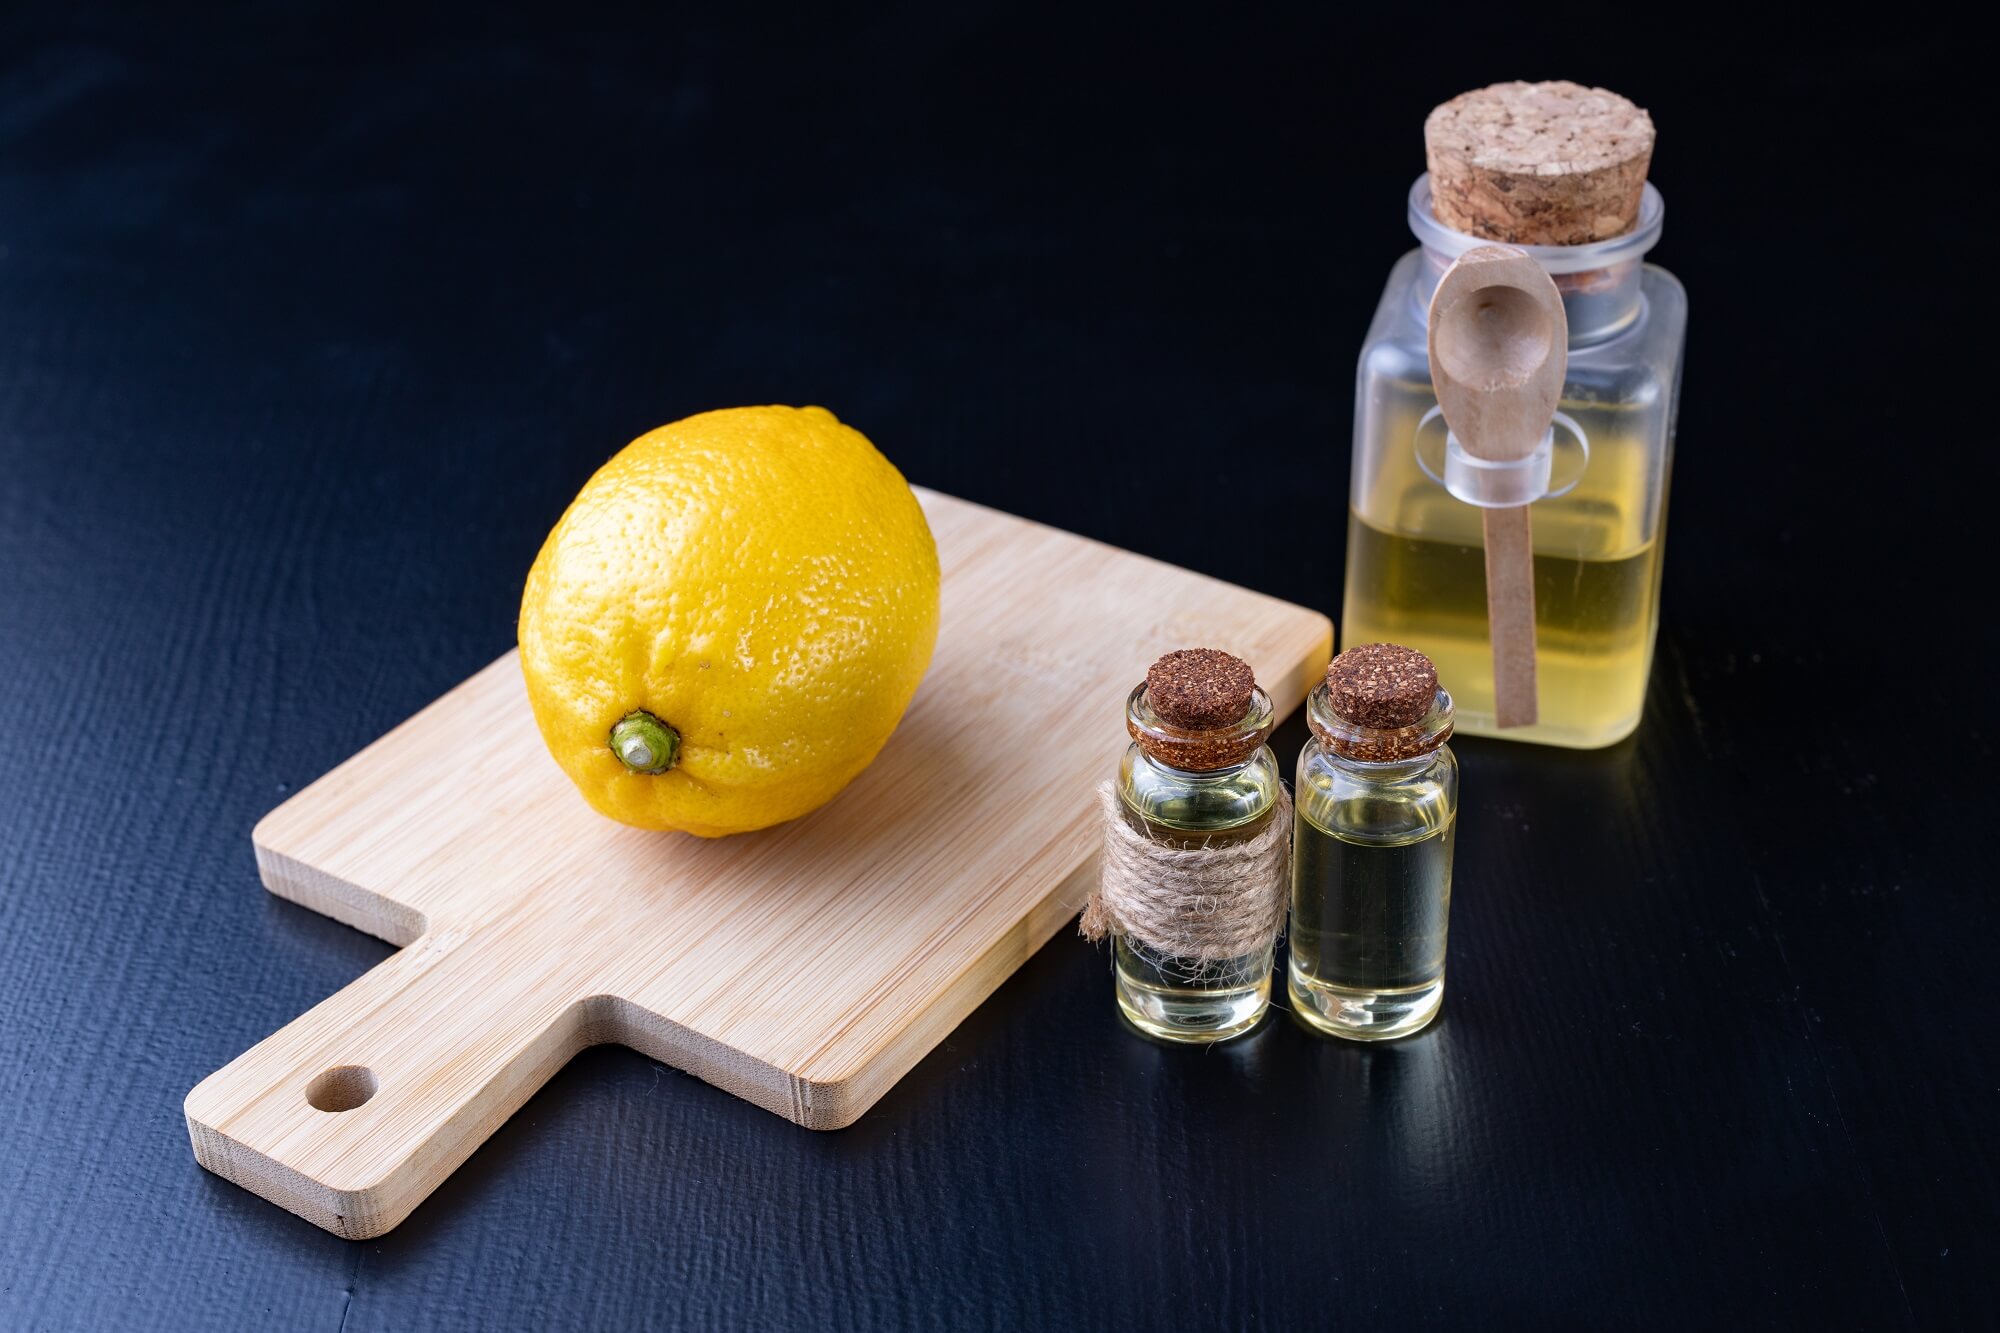 Lemon fruit on wooden board with herbal extracts or essential oil bottles.